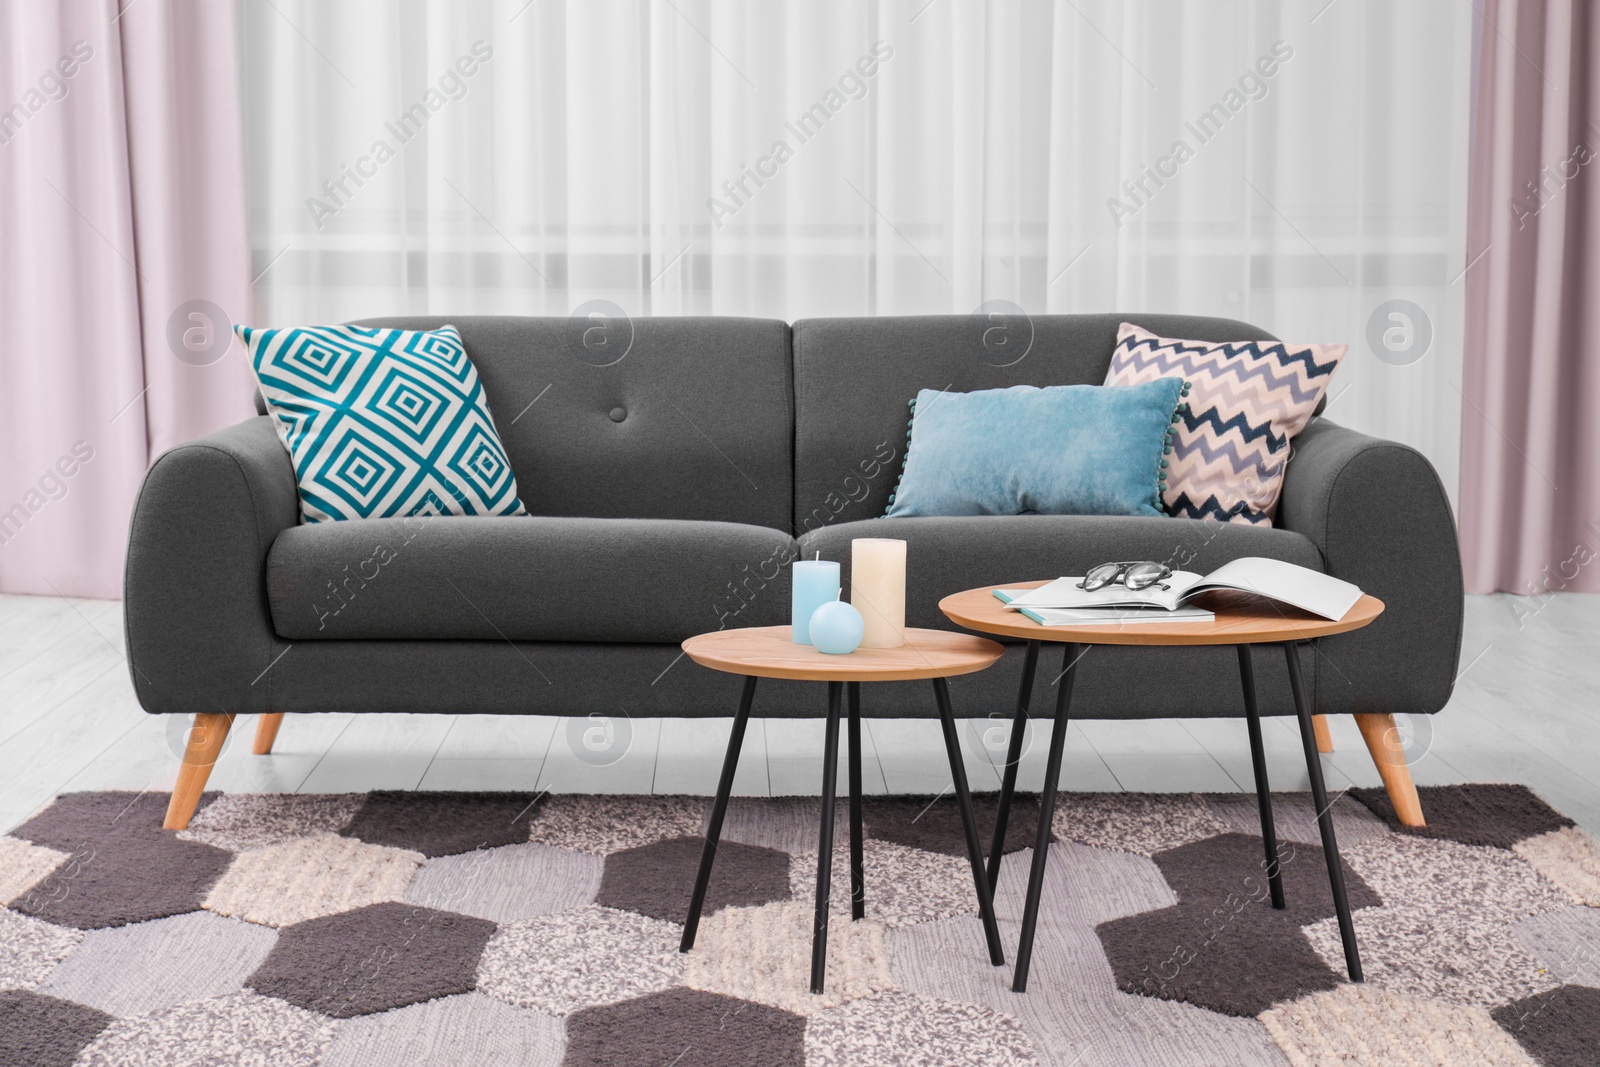 Photo of Comfortable sofa, floor lamp and coffee table in stylish room. Interior design